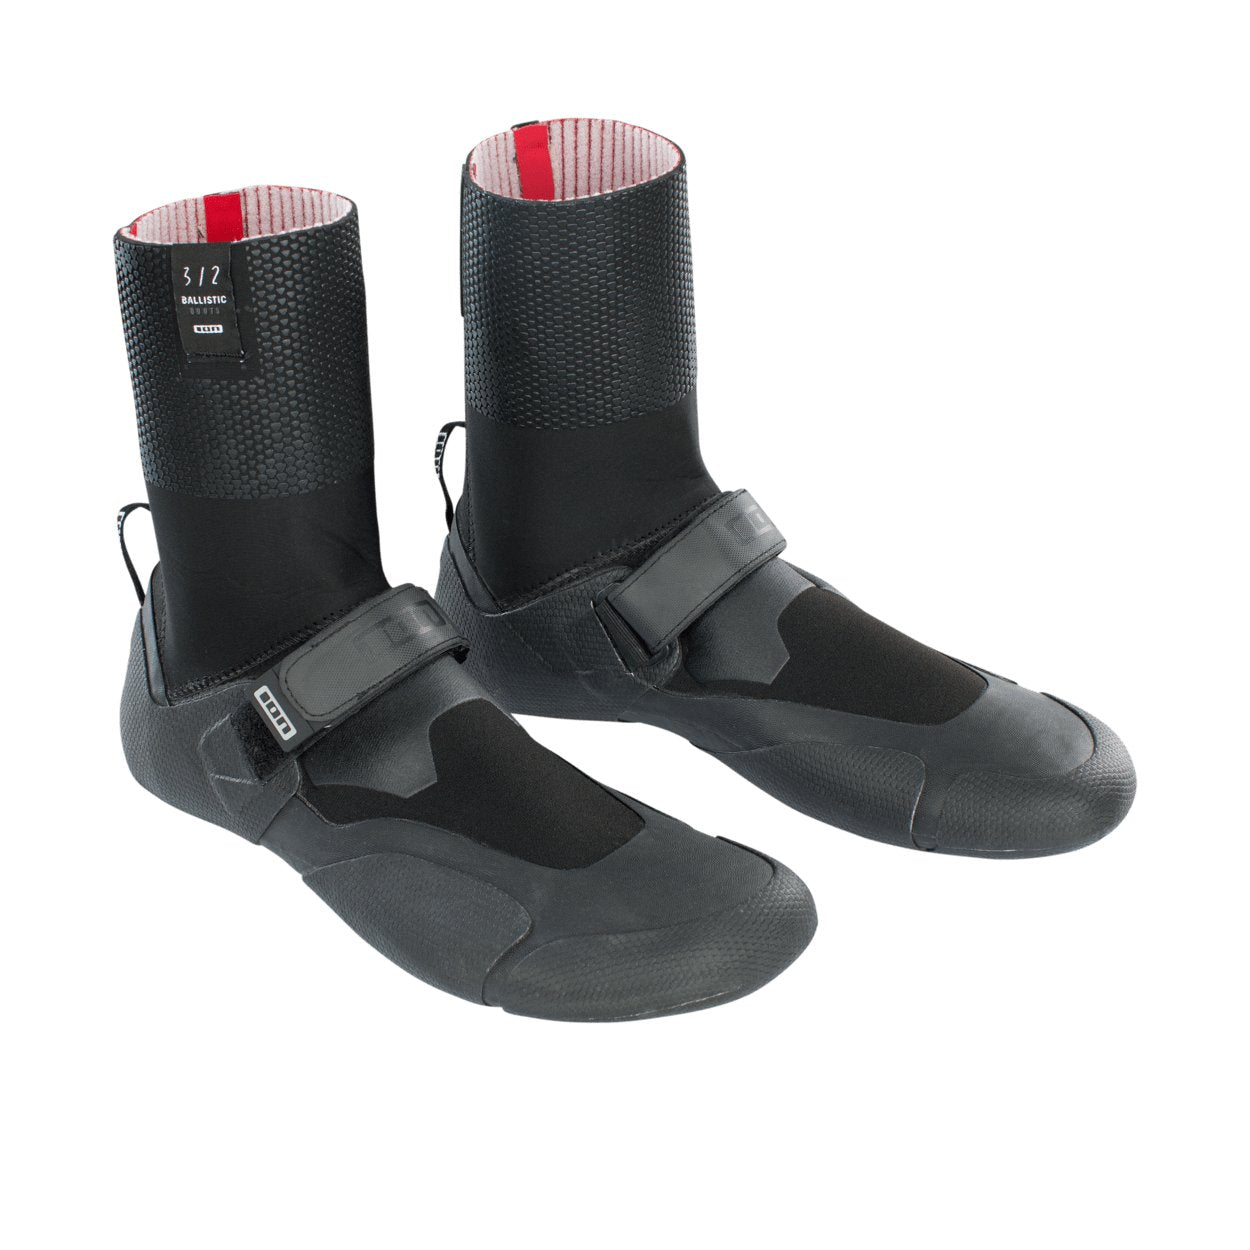 ION Ballistic Boots 3/2 Round Toe 2022 - Worthing Watersports - 9008415883424 - Footwear - ION Water